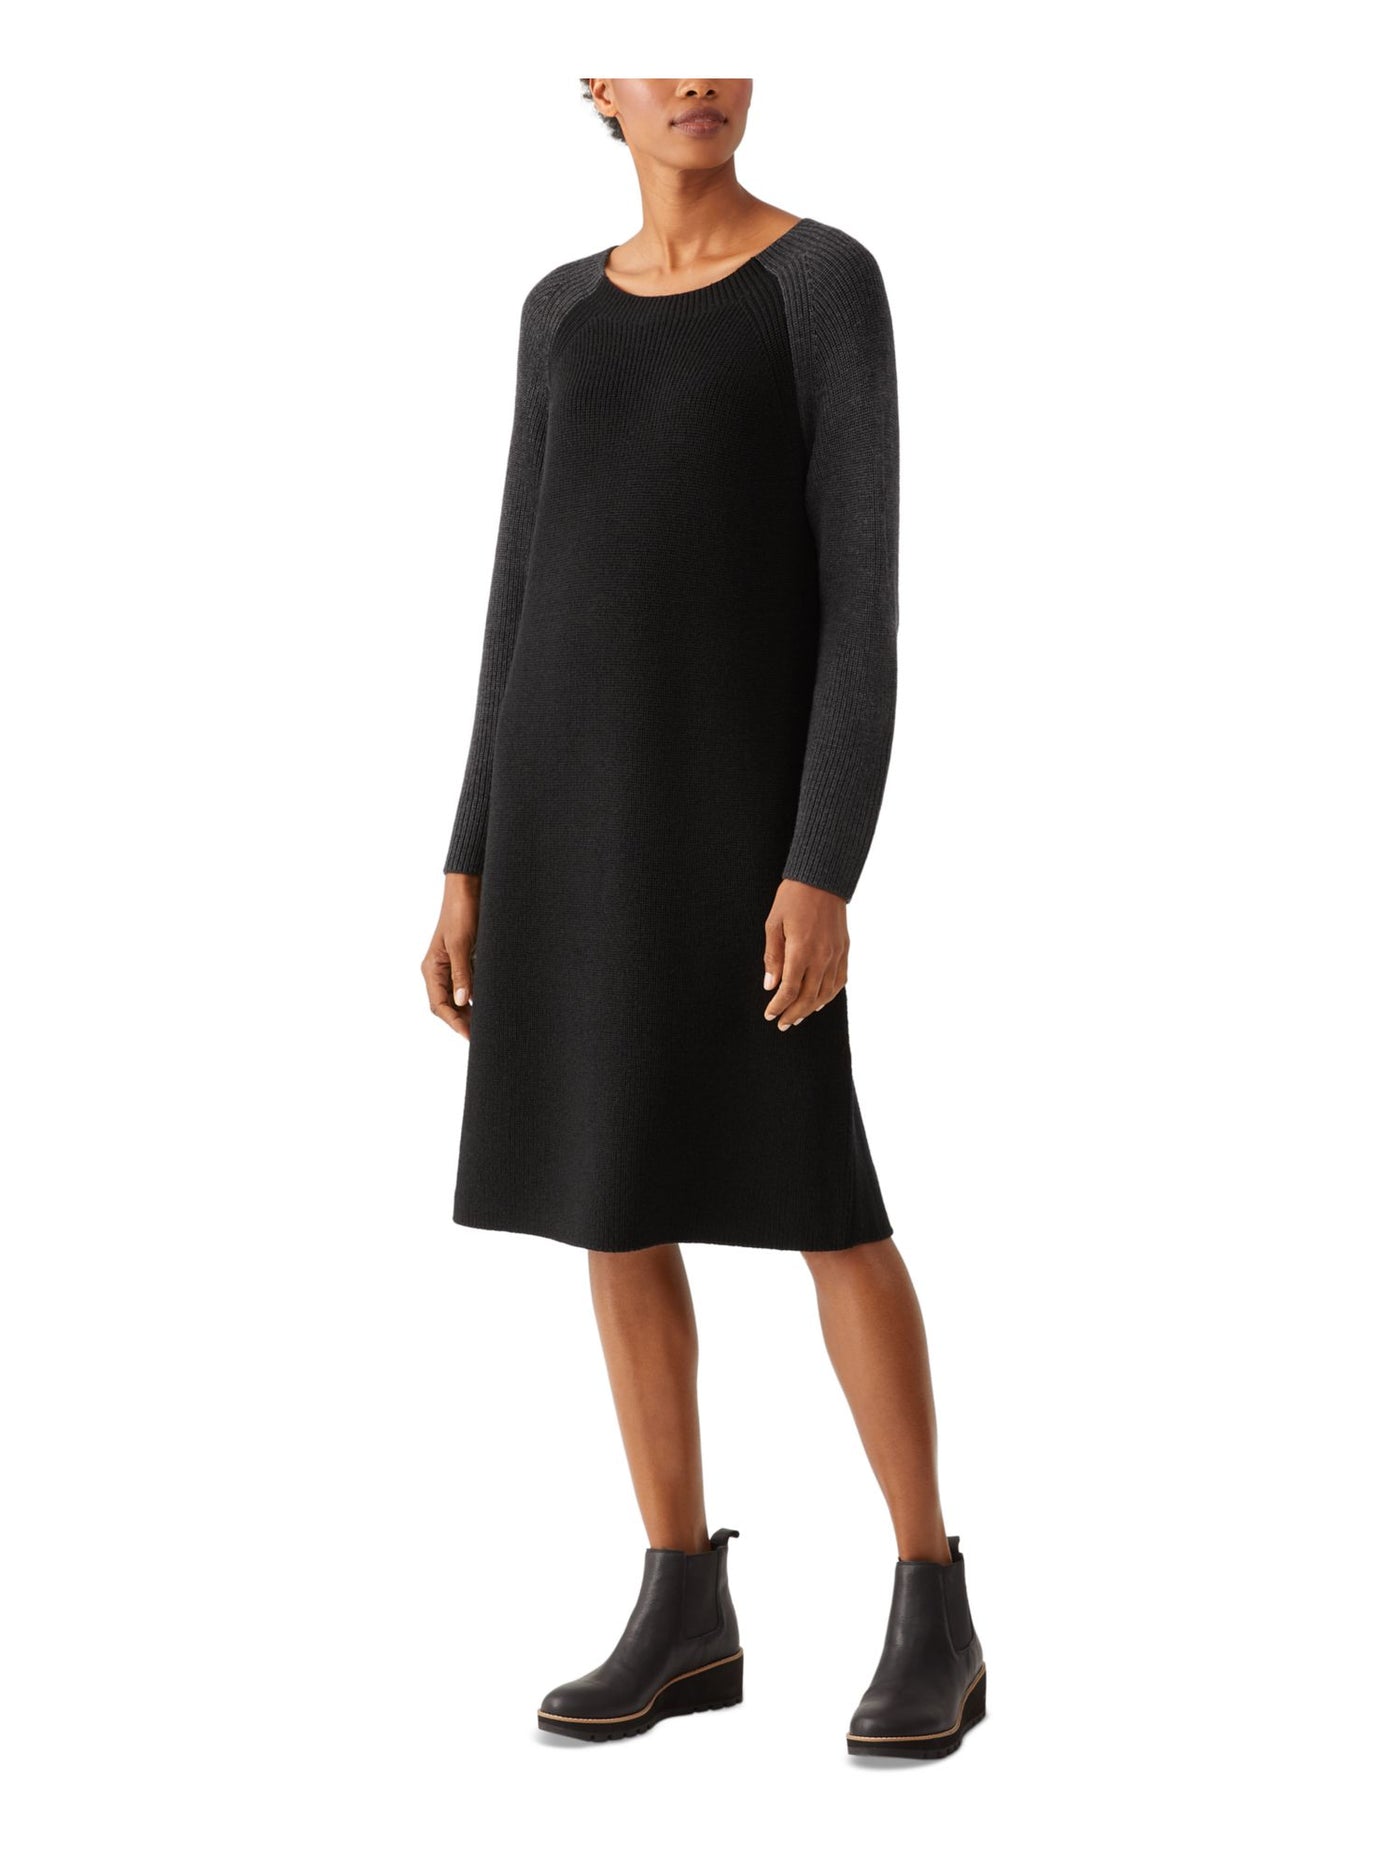 EILEEN FISHER Womens Black Stretch Ribbed Pullover Styling Color Block Long Sleeve Crew Neck Below The Knee Sweater Dress L